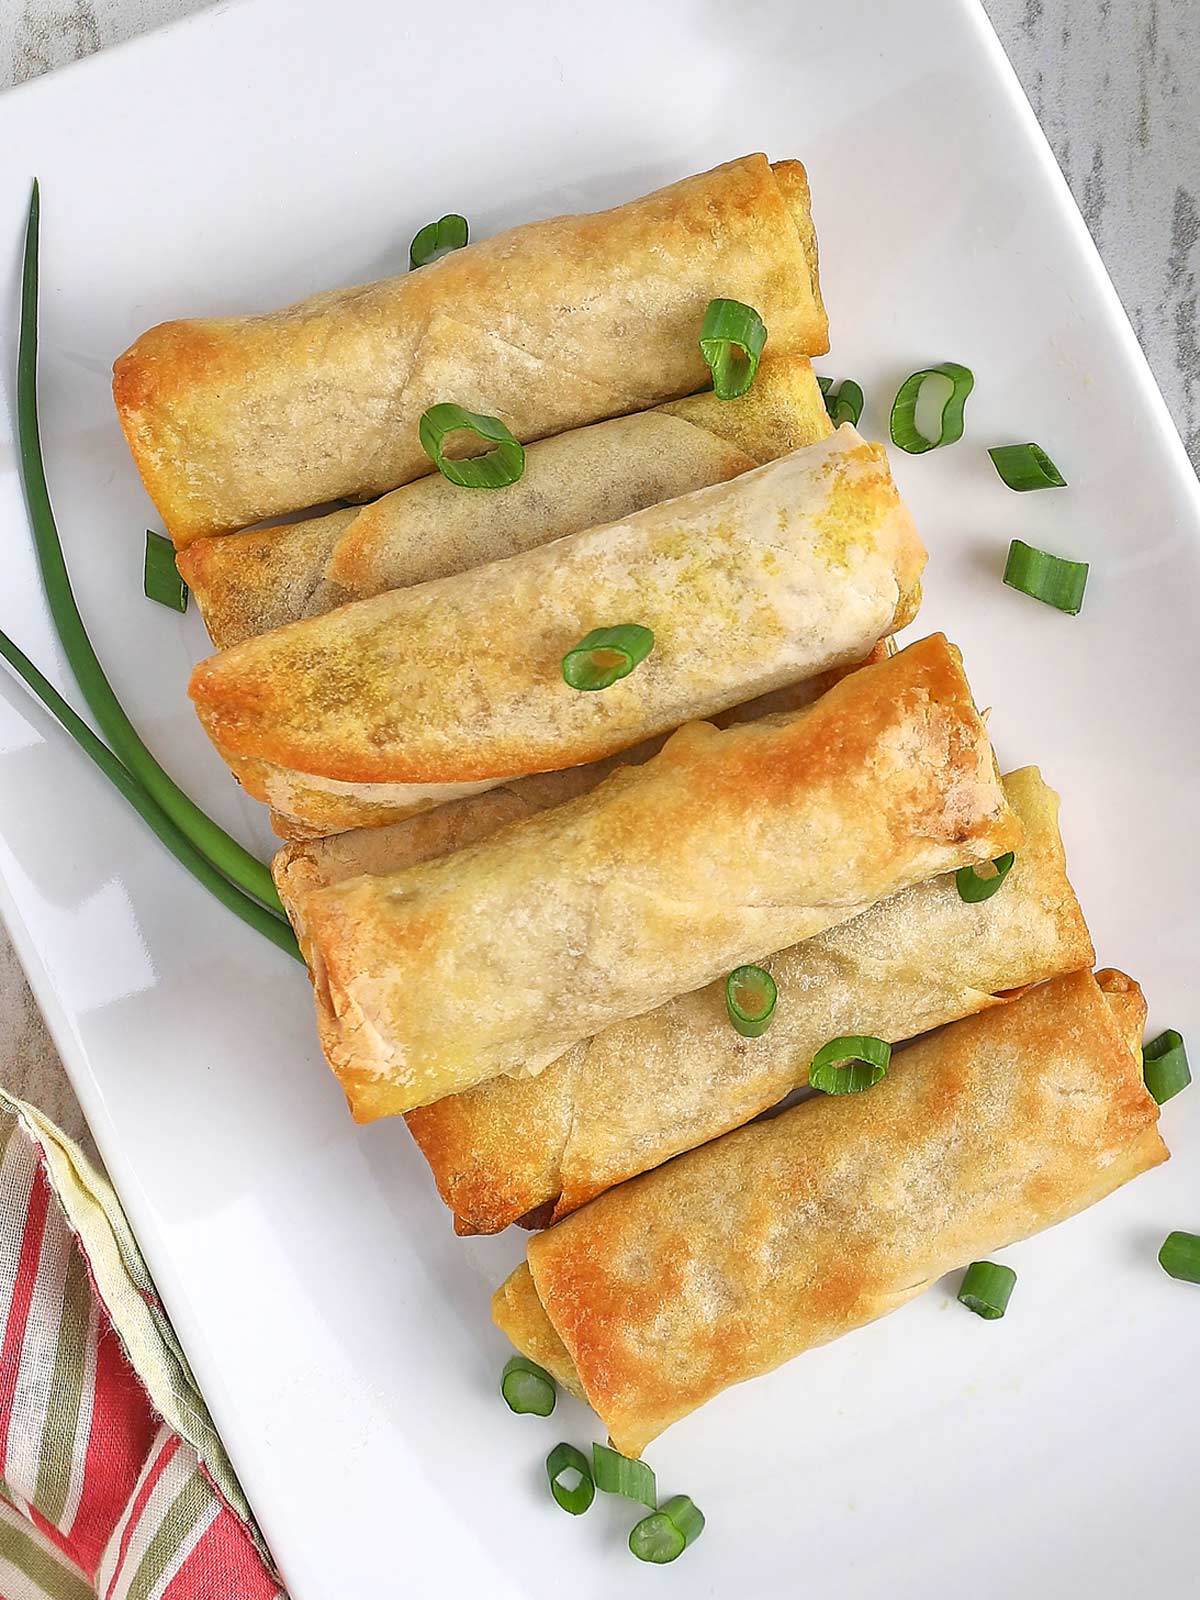 Serving tray with fully cooked lumpia, ready to serve.